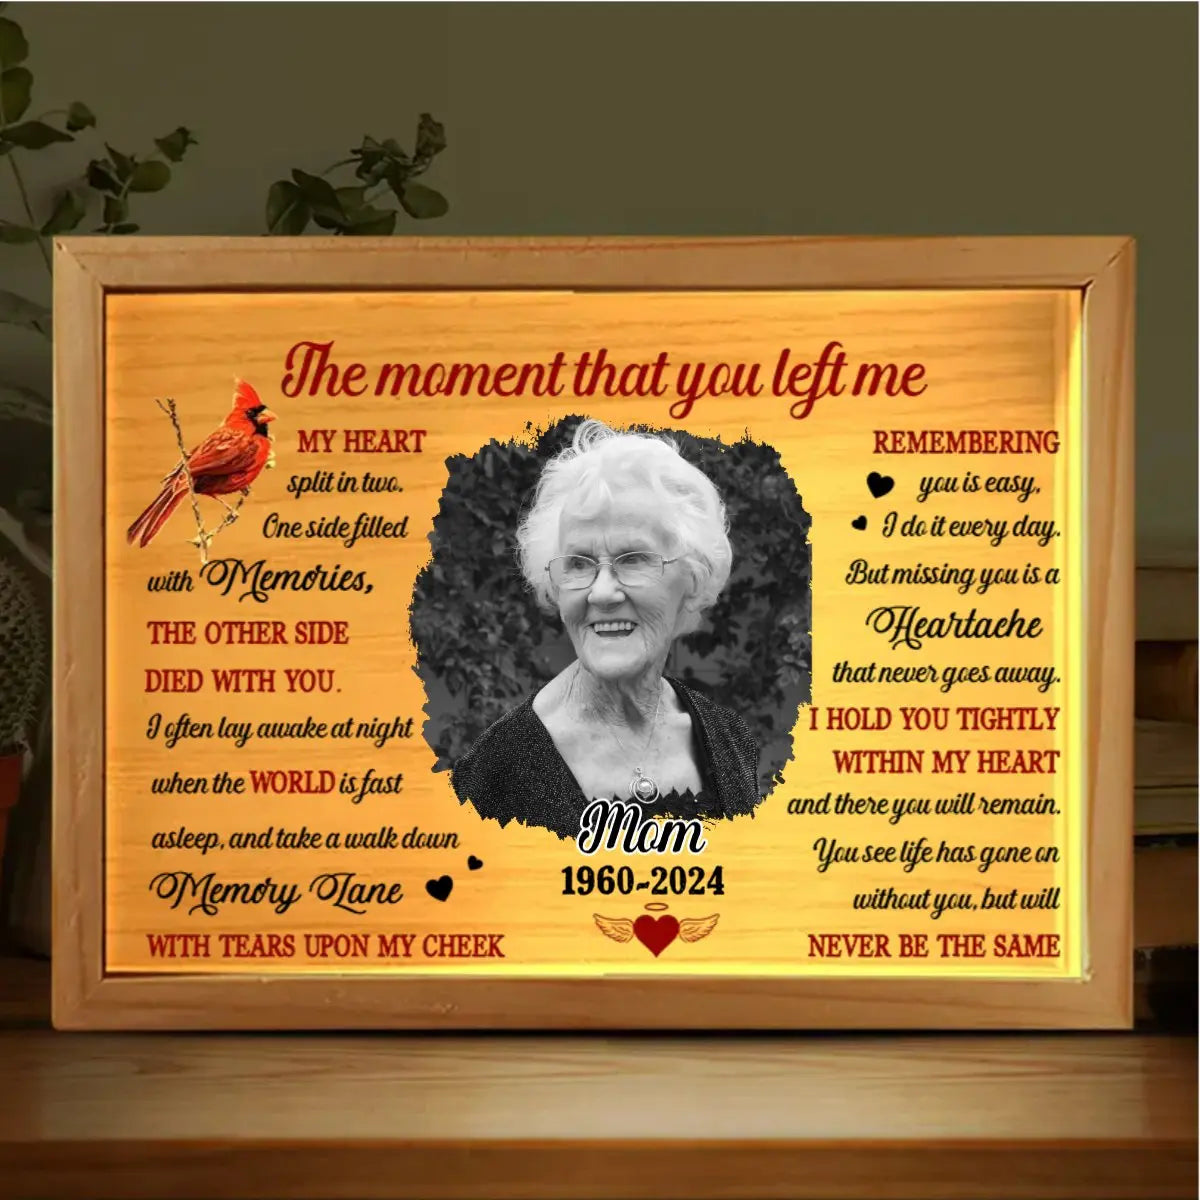 Family - The Moment That You Left Me - Personalized Frame Light Box (NV)